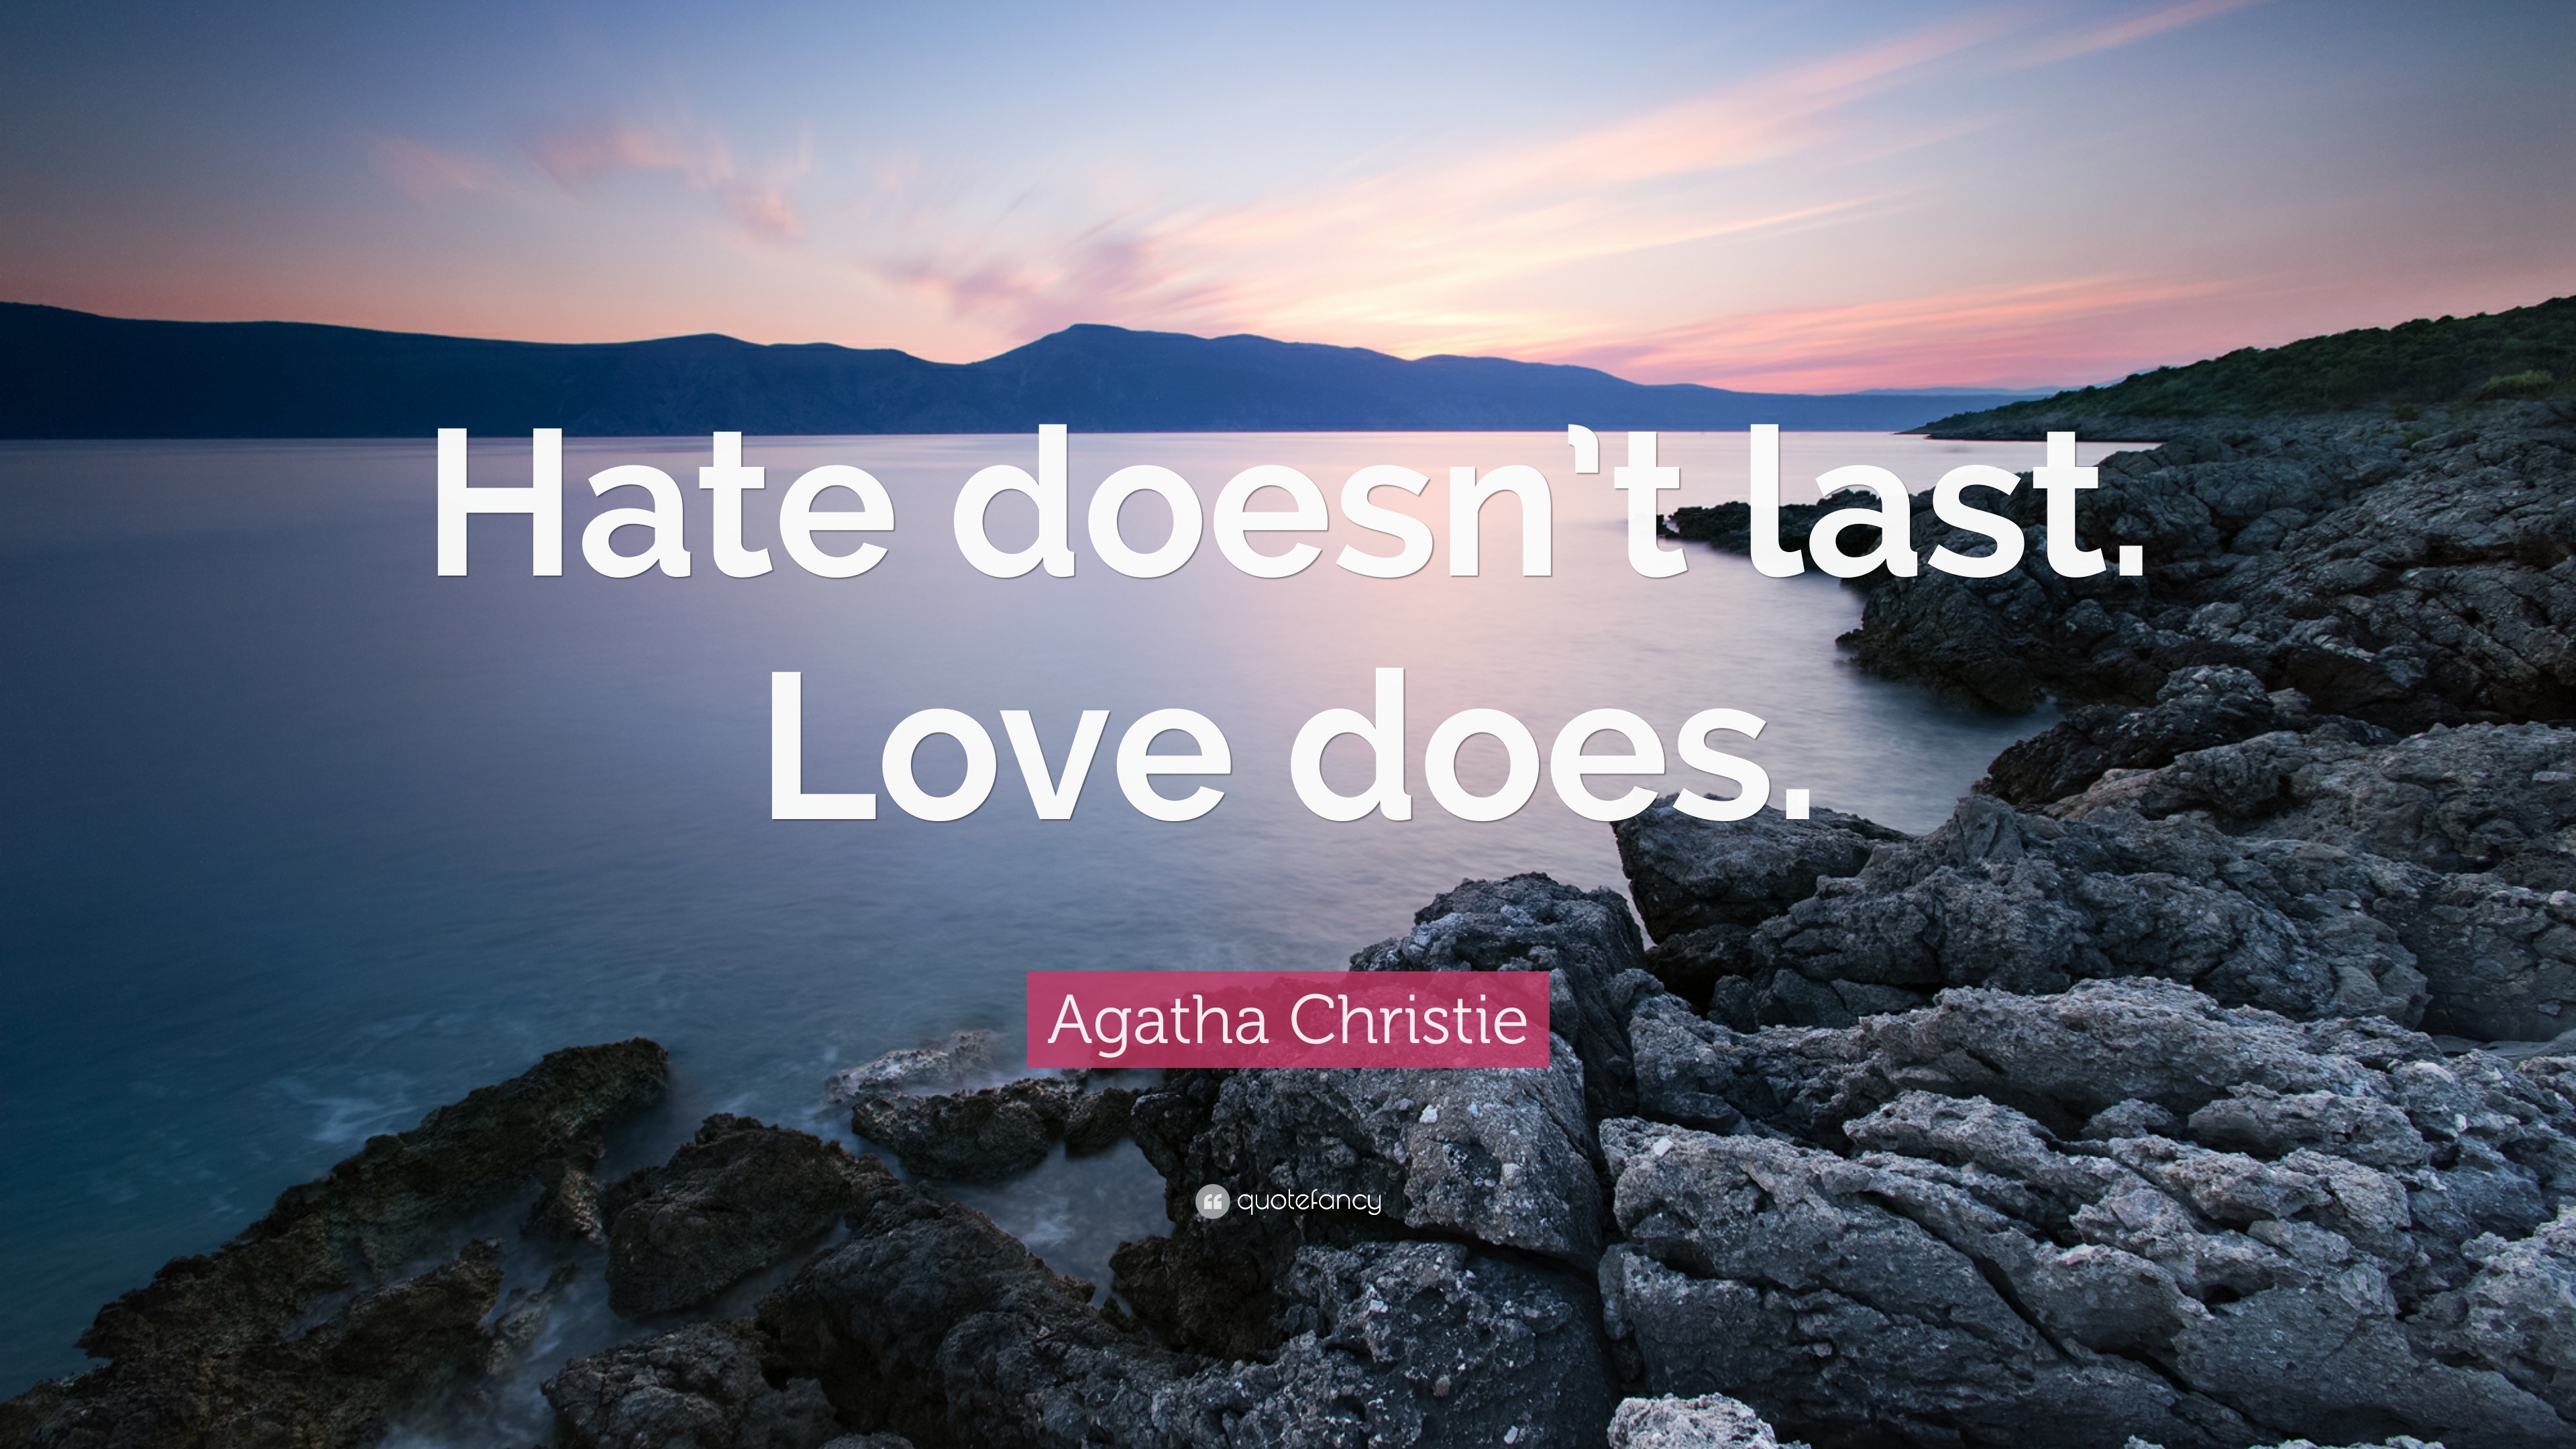 Agatha Christie Quote “Hate doesn t last Love does ”